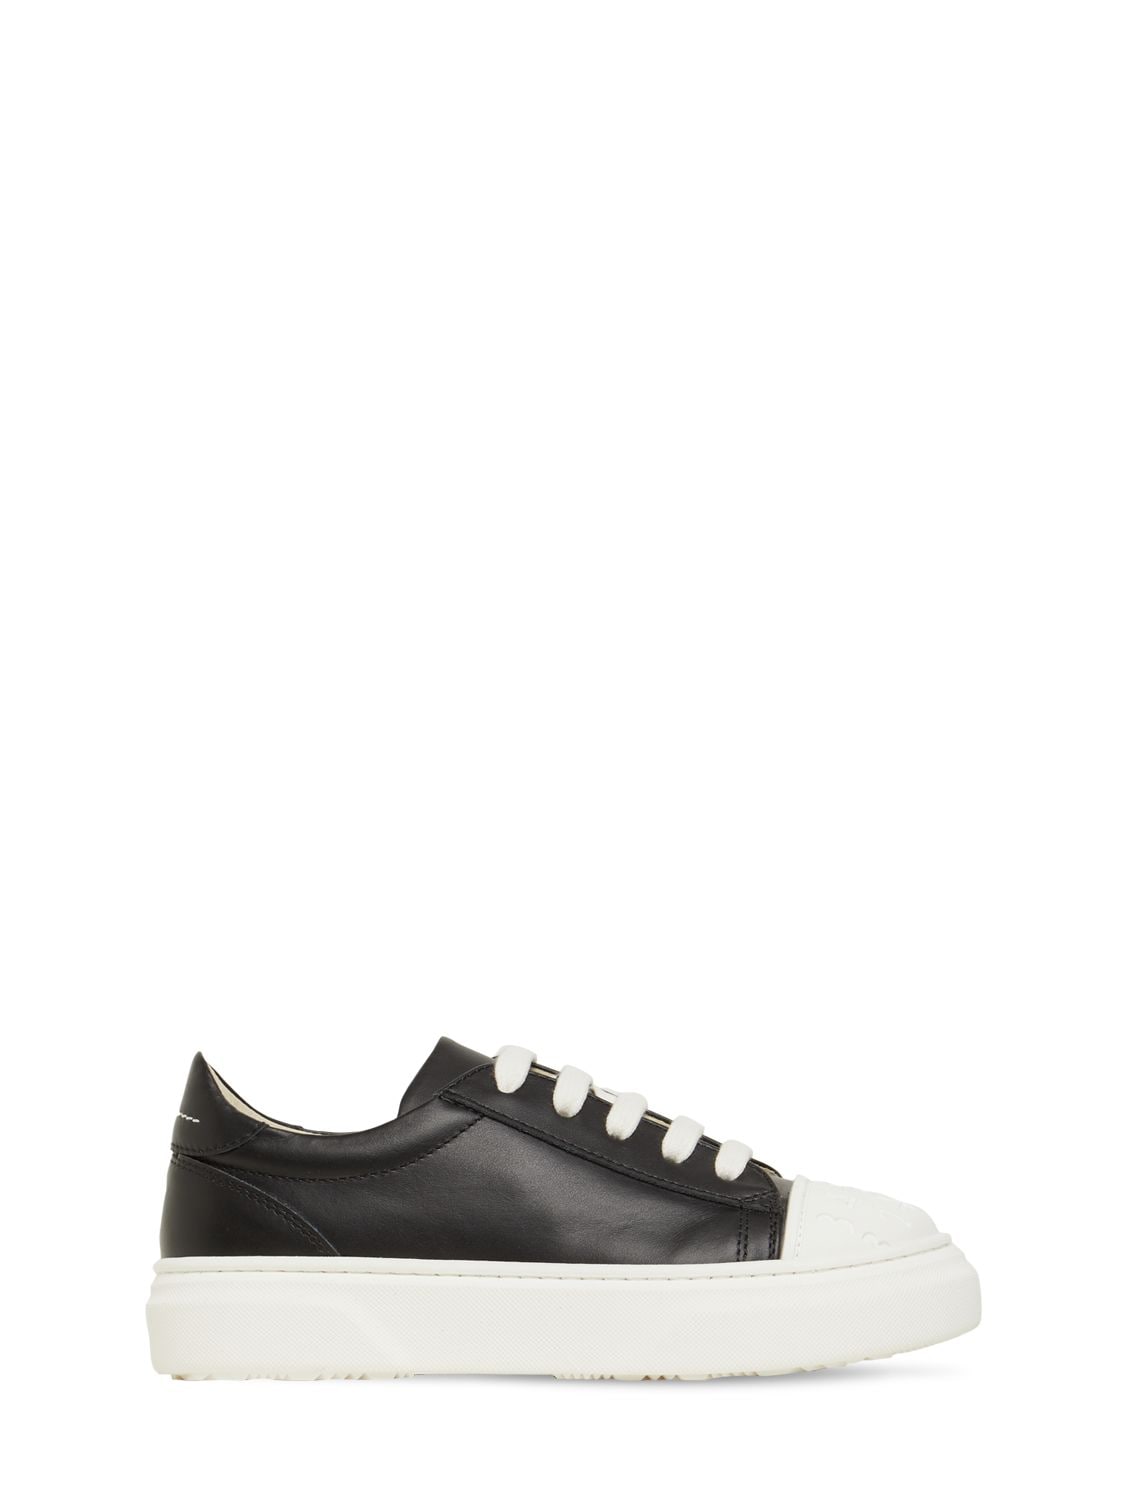 Mm6 Maison Margiela - Embossed logo lace-up leather sneakers - Black ...